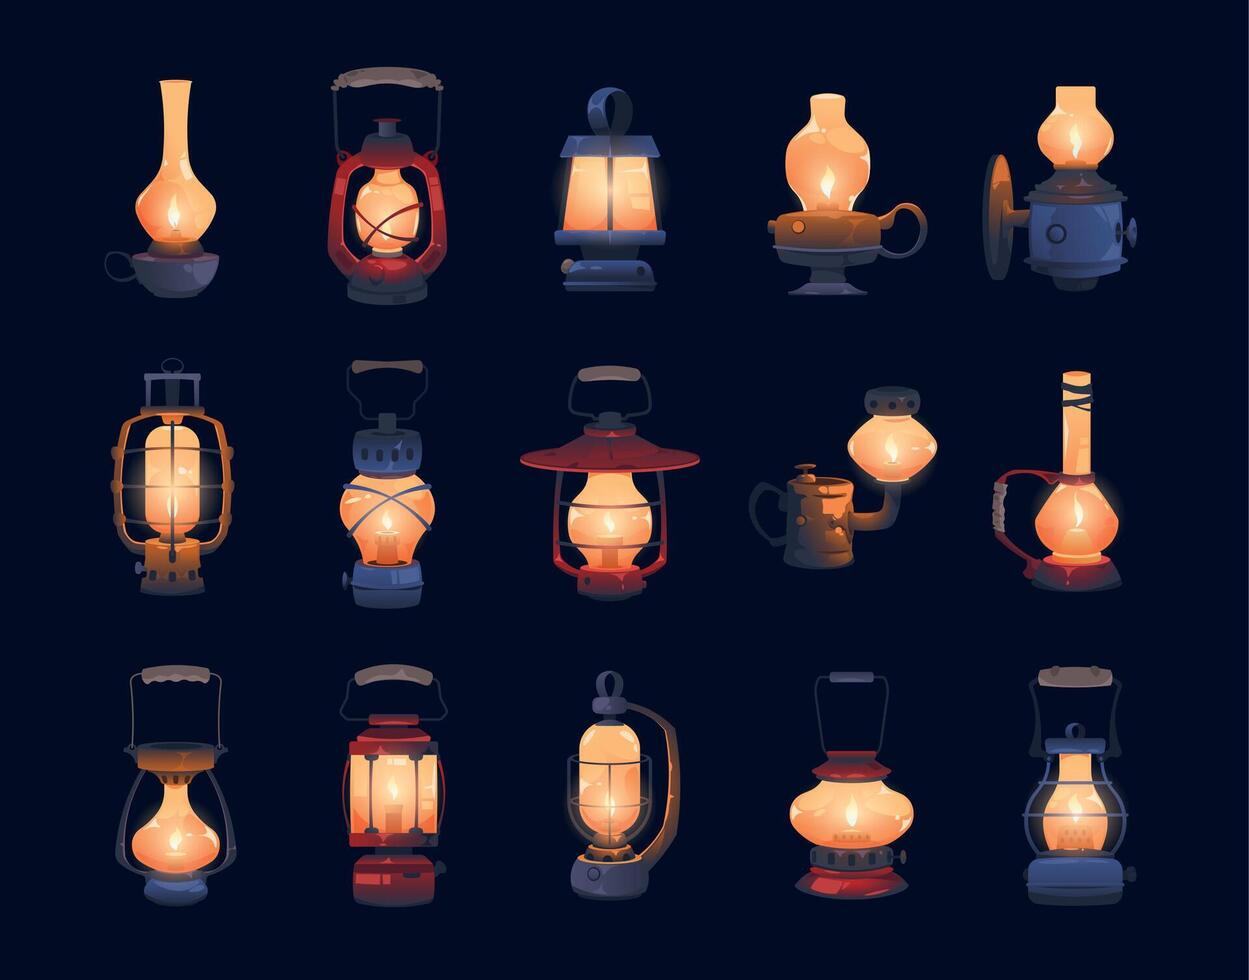 Cartoon lantern. Old gas kerosene lamp with burning wick and handle, portable tourist camping or hiking lighting equipment flat style. Vector isolated set